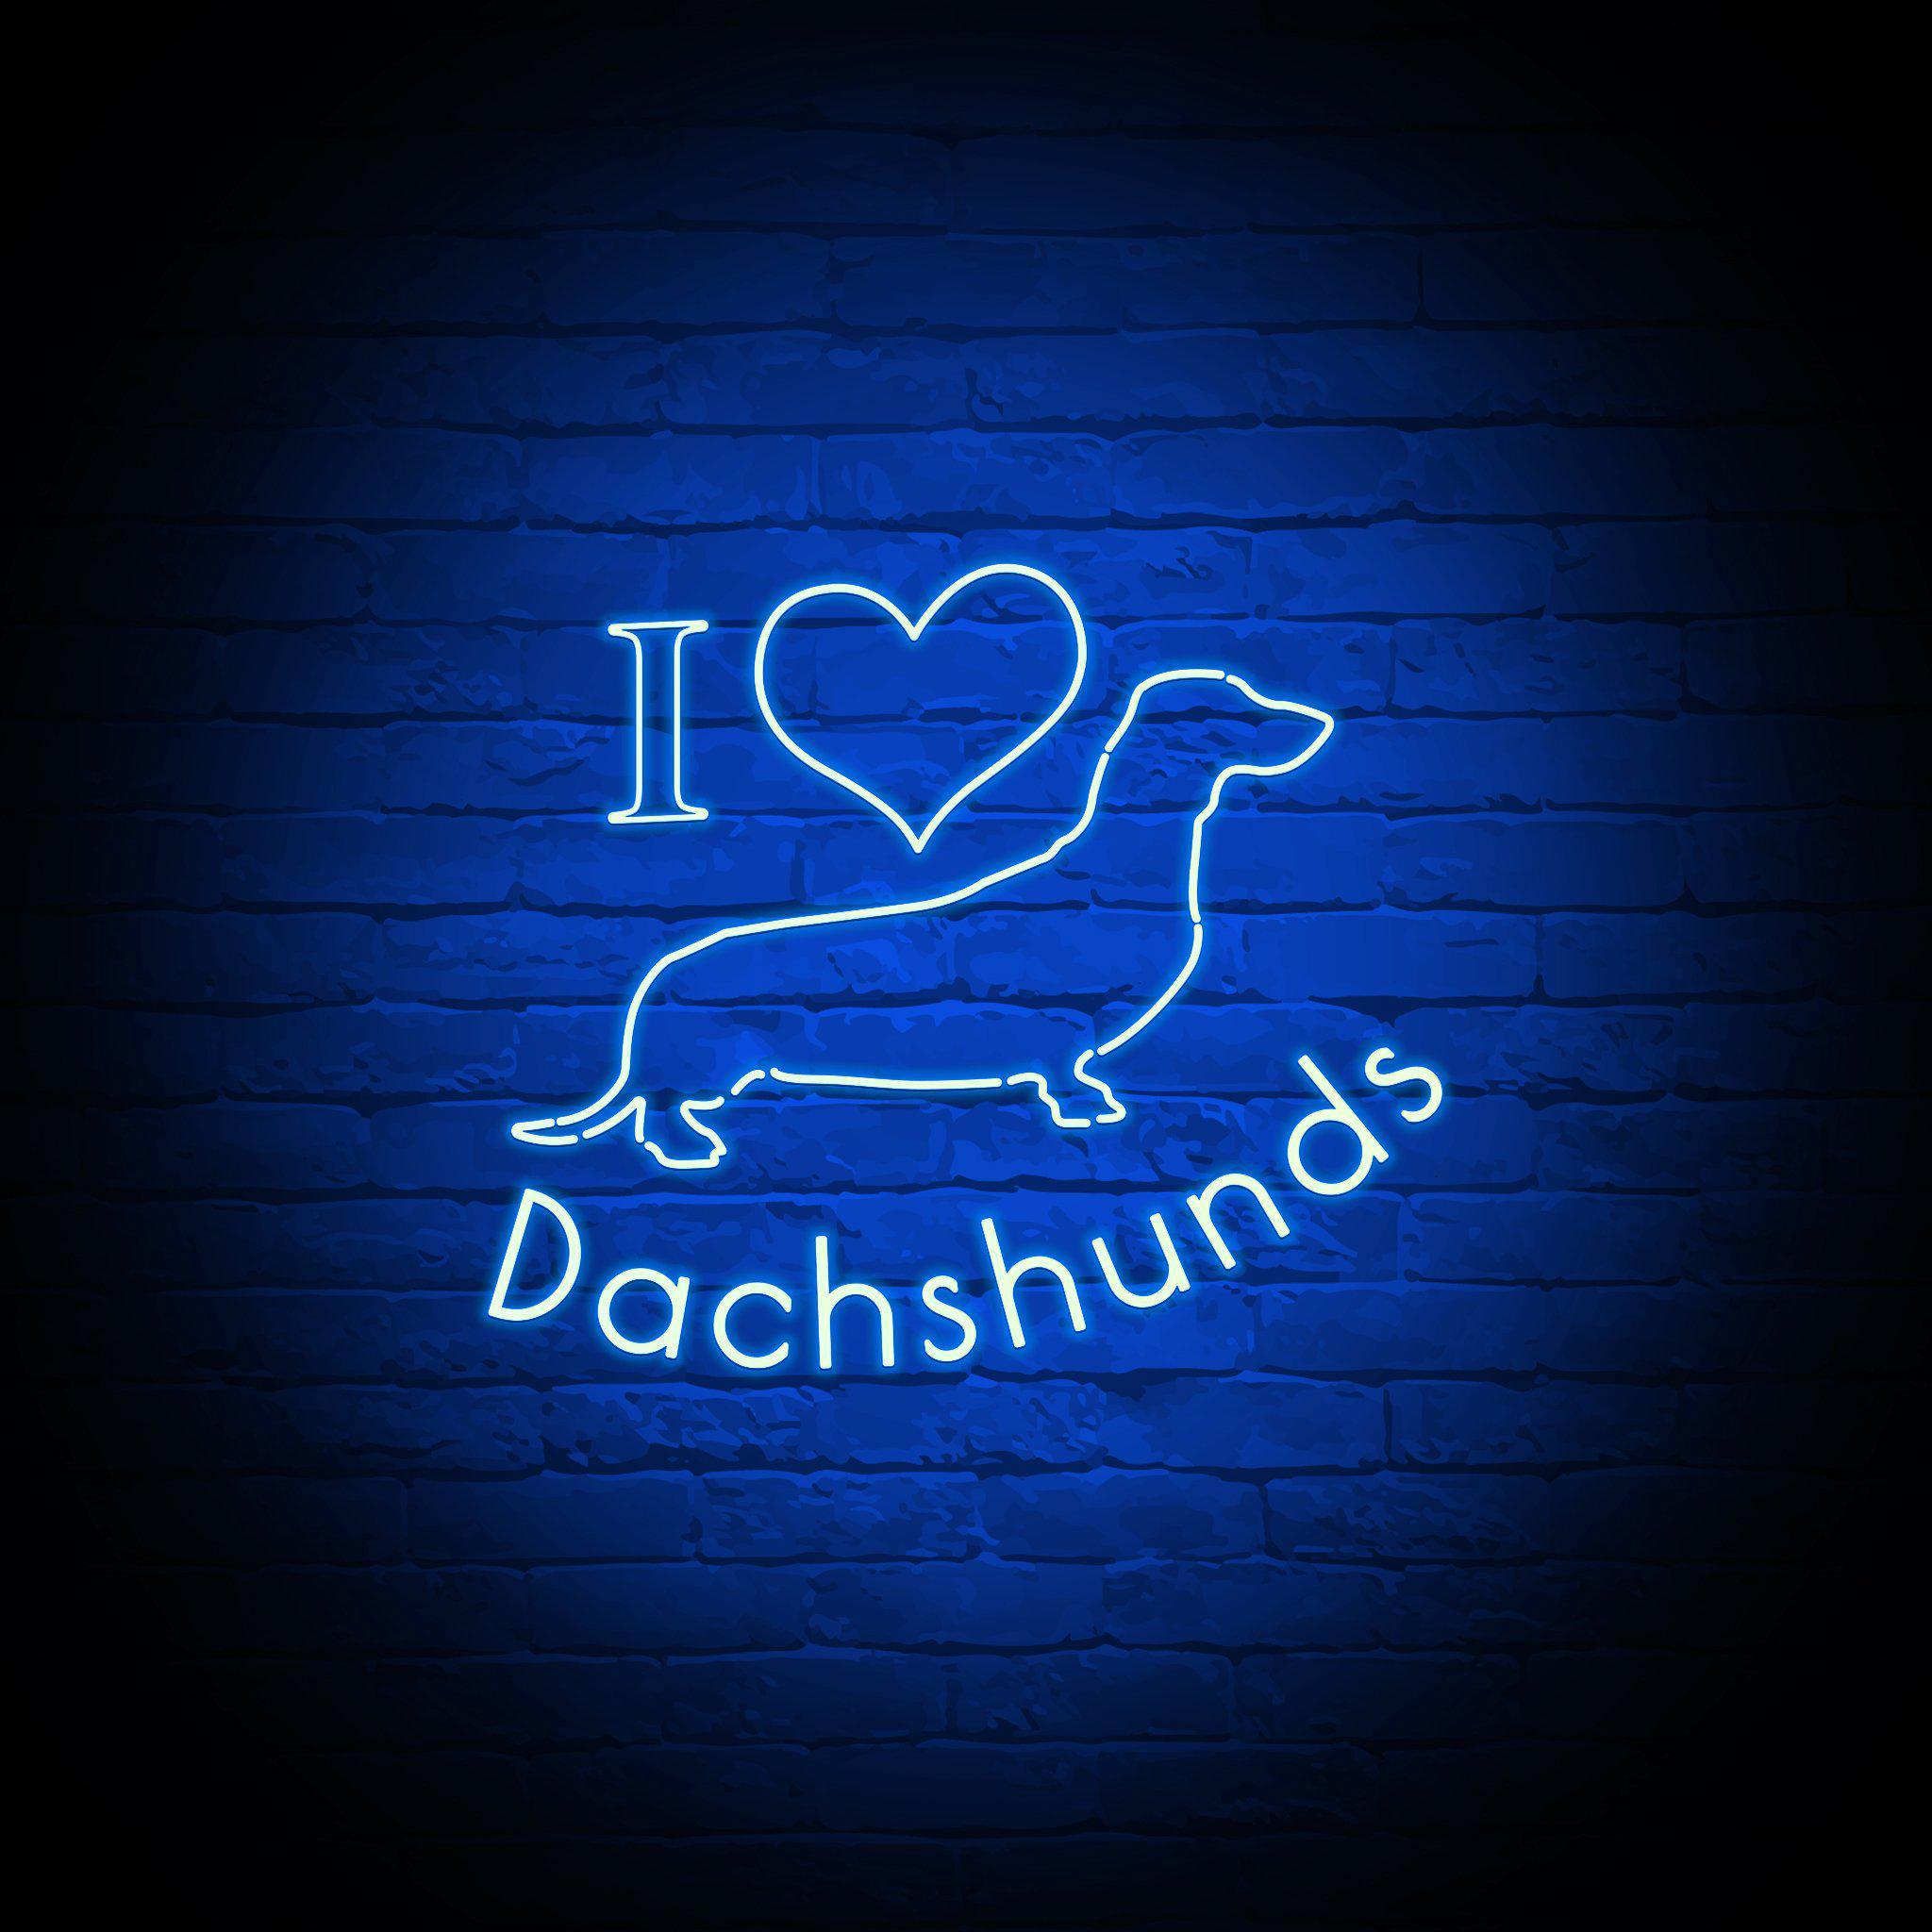 'I LOVE DACHSHUNDS' NEON SIGN - NeonFerry